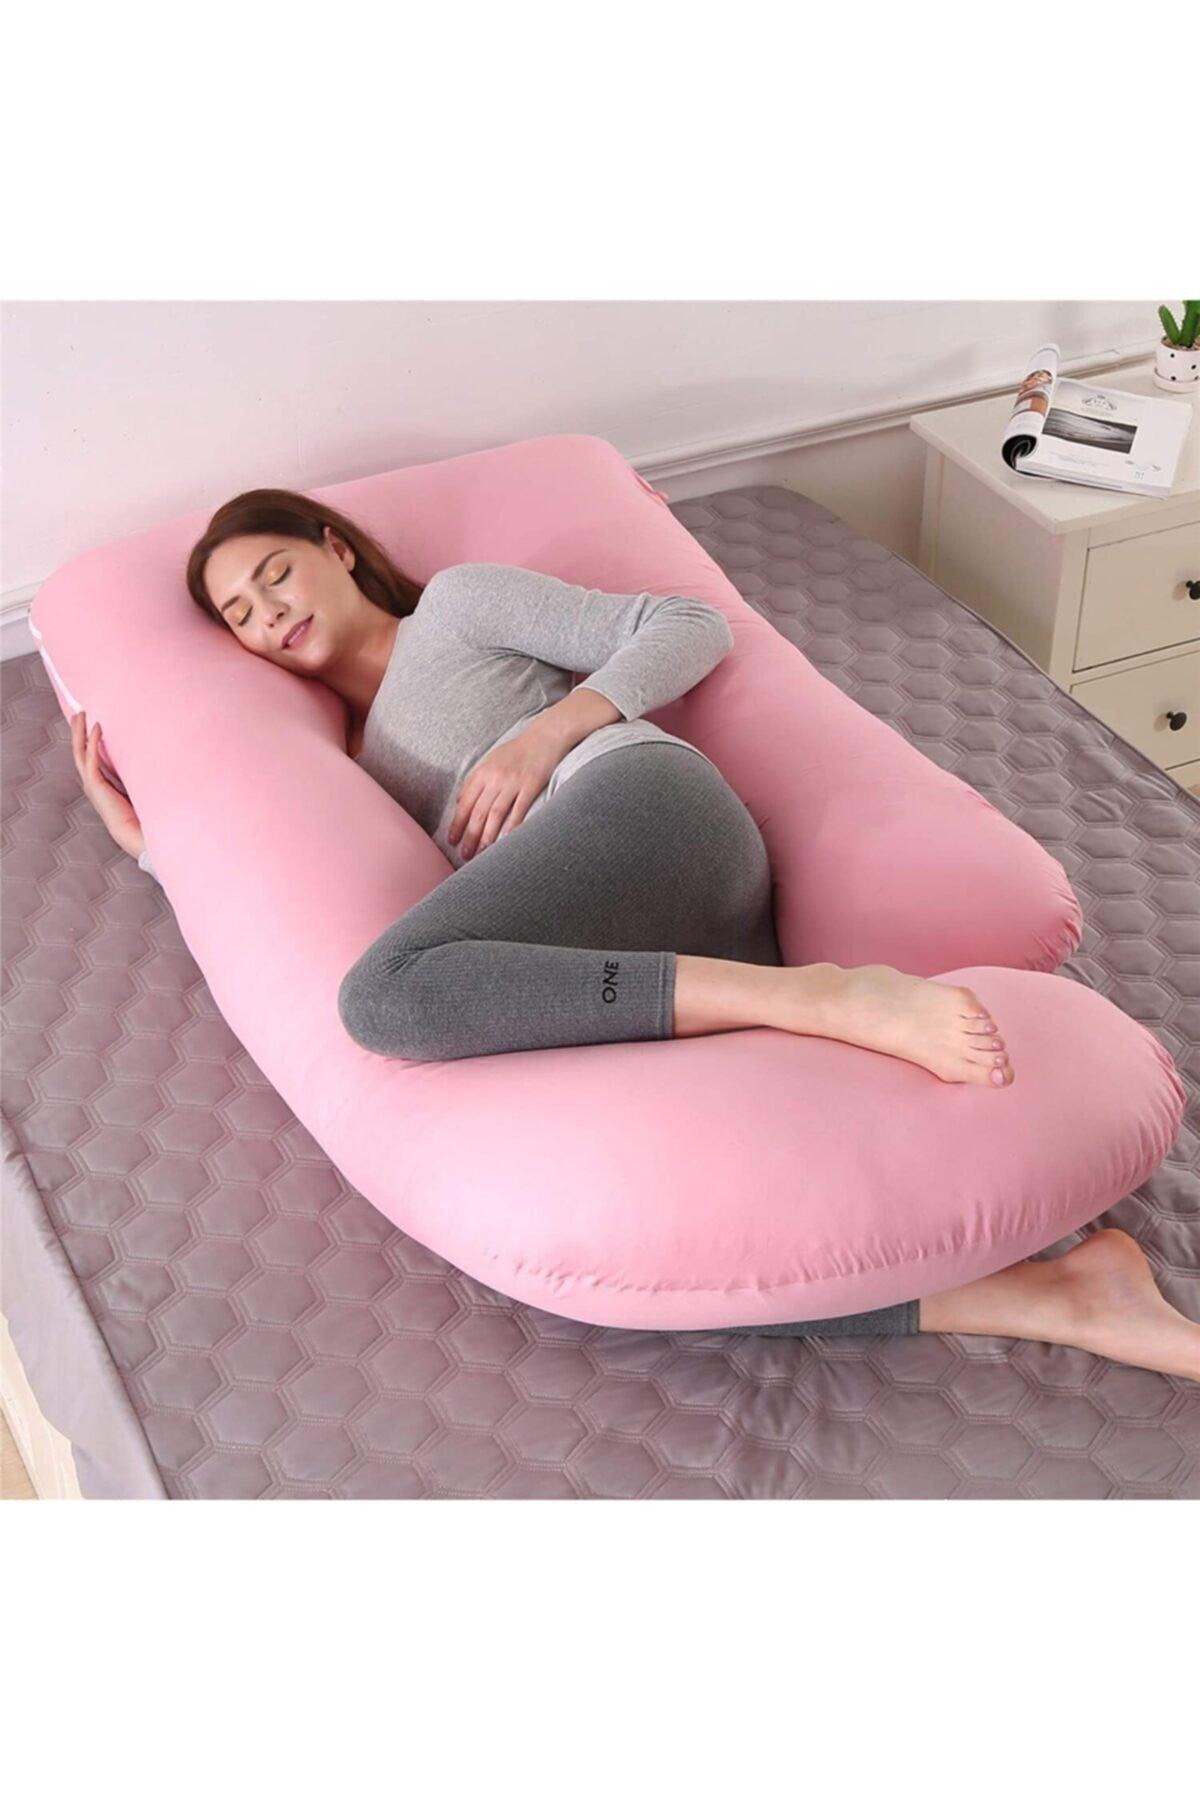 5 Different Region Supported Pregnancy Pillow (LINED) - Swordslife